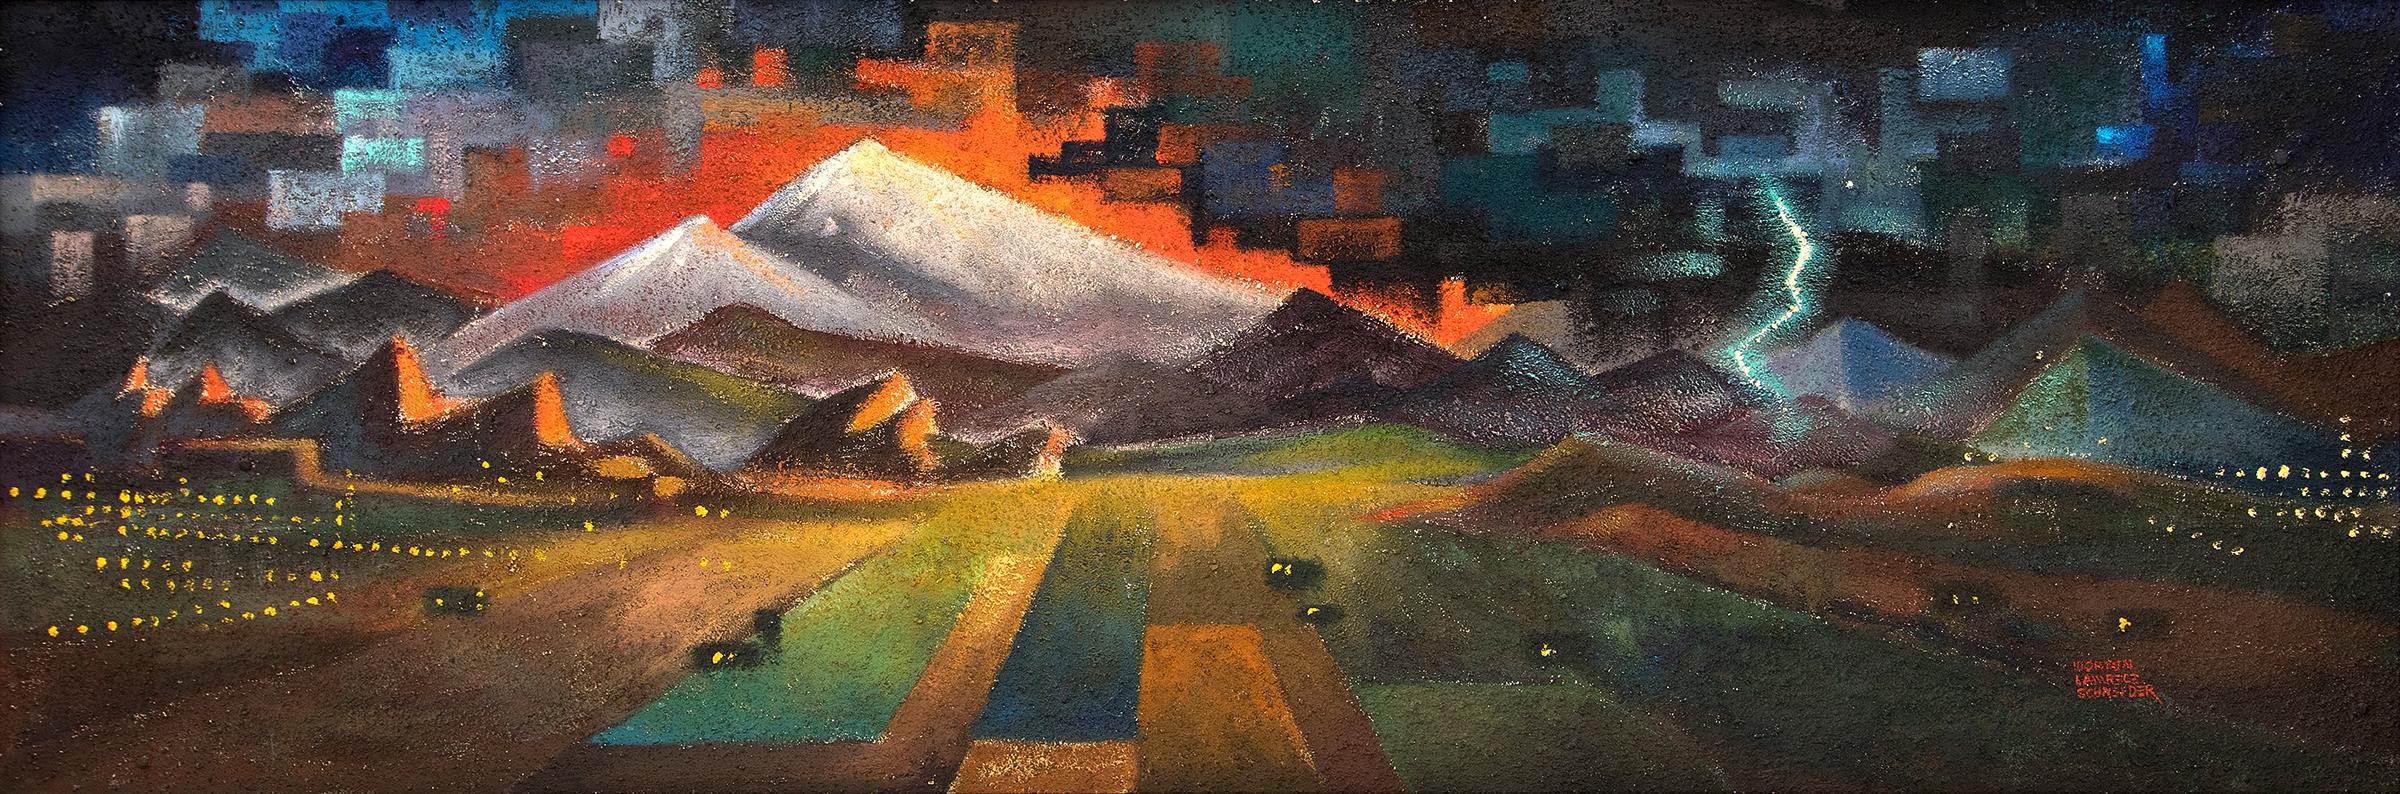 Southwestern Landscape Painting,  Lightning Storm over Mountains, Semi Abstract (Schwarz), Abstract Painting, von Morton Lawrence Schneider